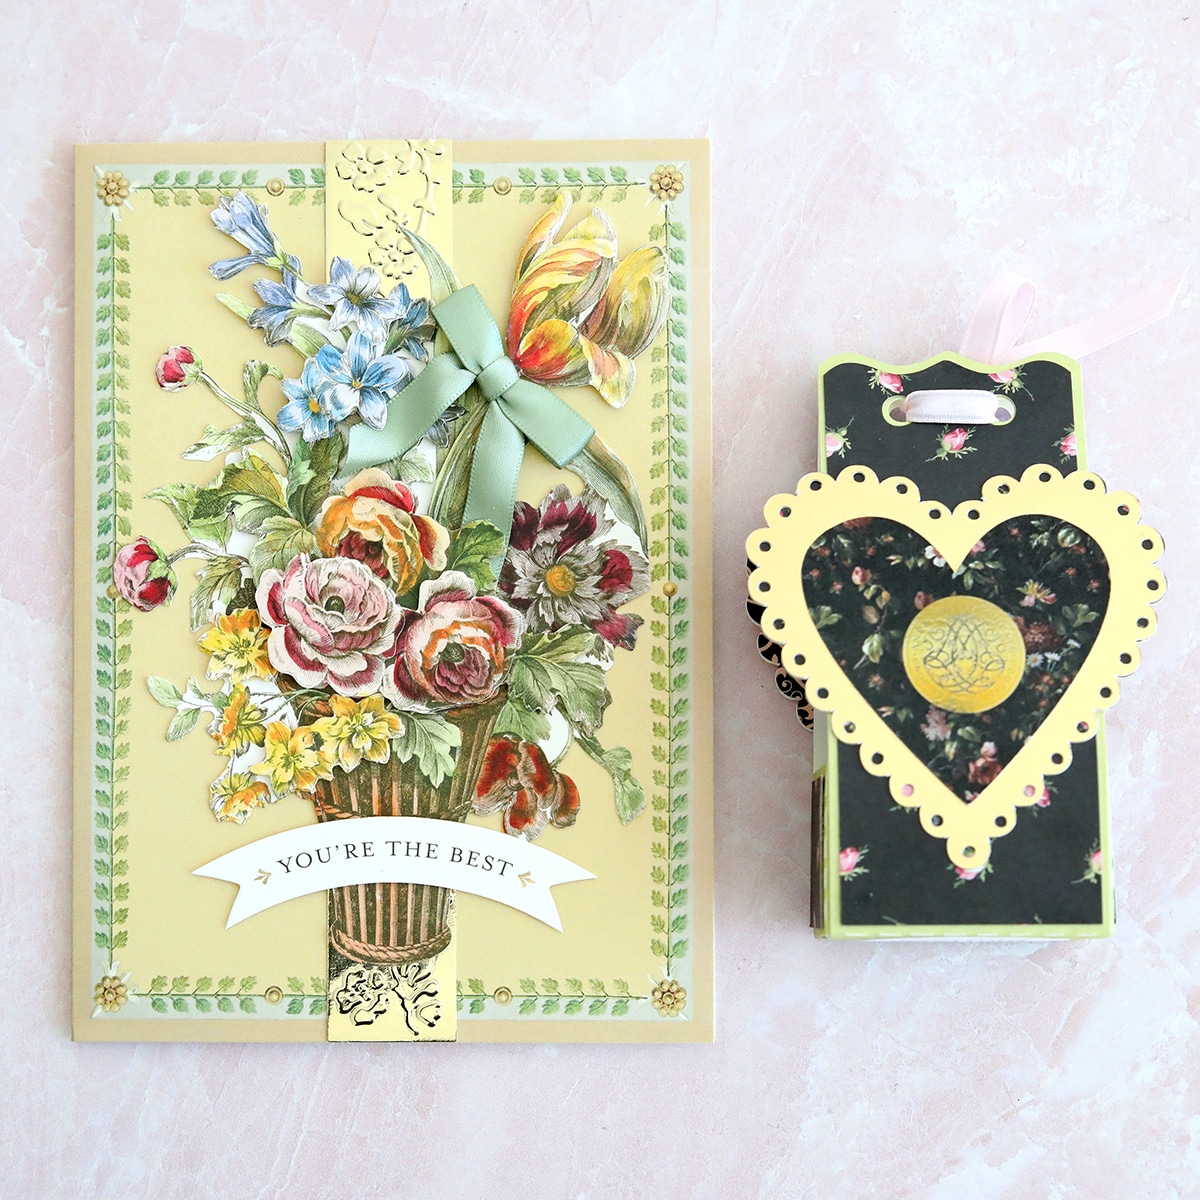 a card and a box with a flower bouquet on it.